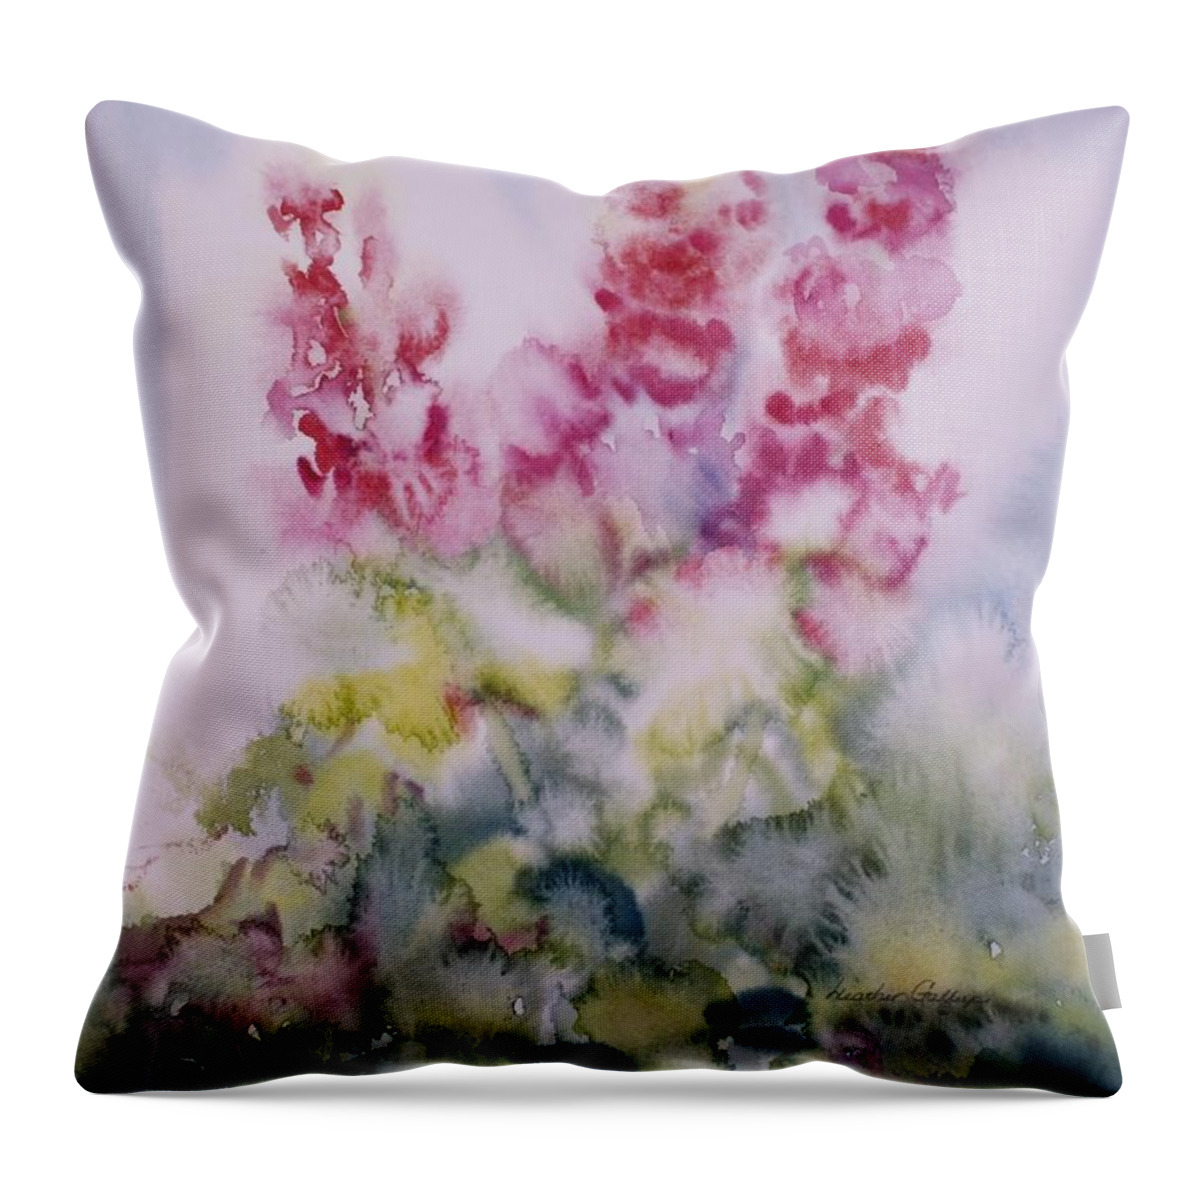 Watercolour Throw Pillow featuring the painting Summer Breeze by Heather Gallup